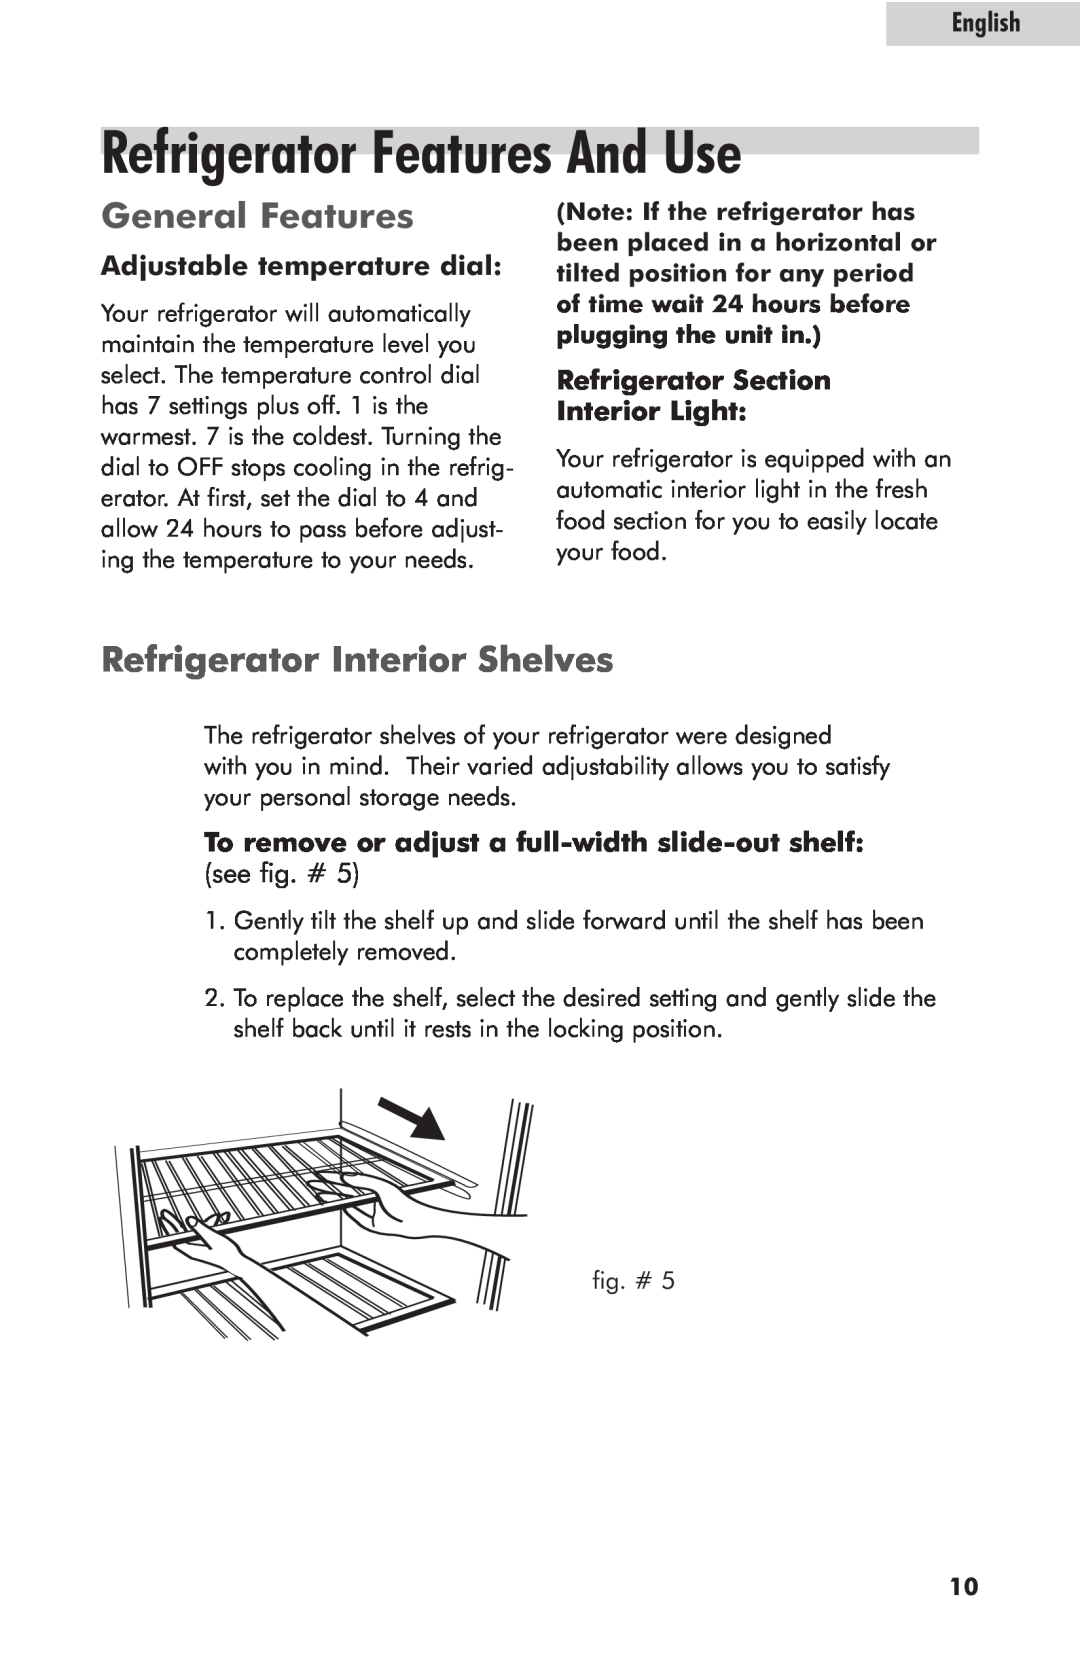 Haier HRE10WNAWW user manual Refrigerator Features And Use, General Features, Refrigerator Interior Shelves, English 